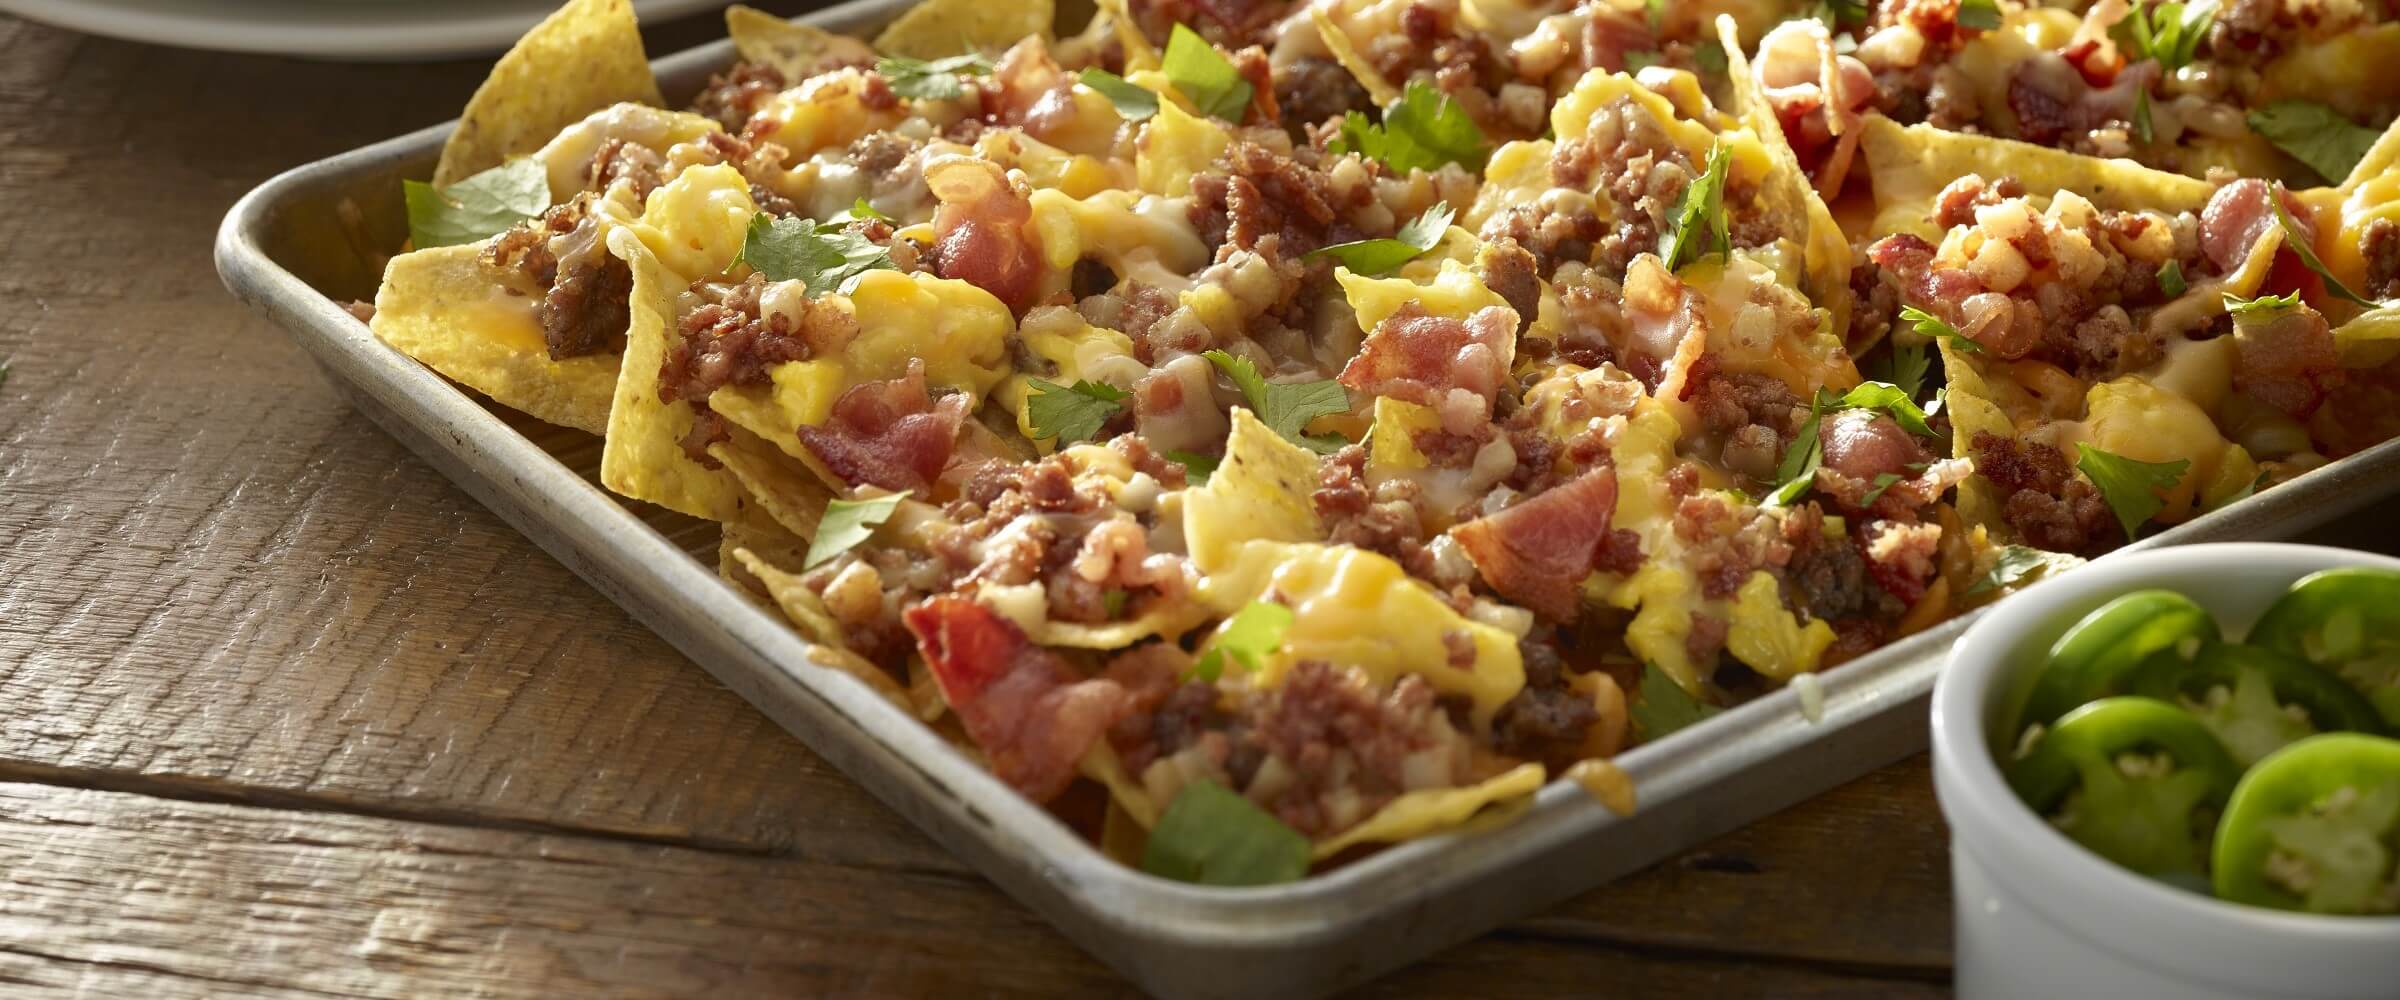 Corned beef hash ultimate nachos on sheet pan with jalapenos